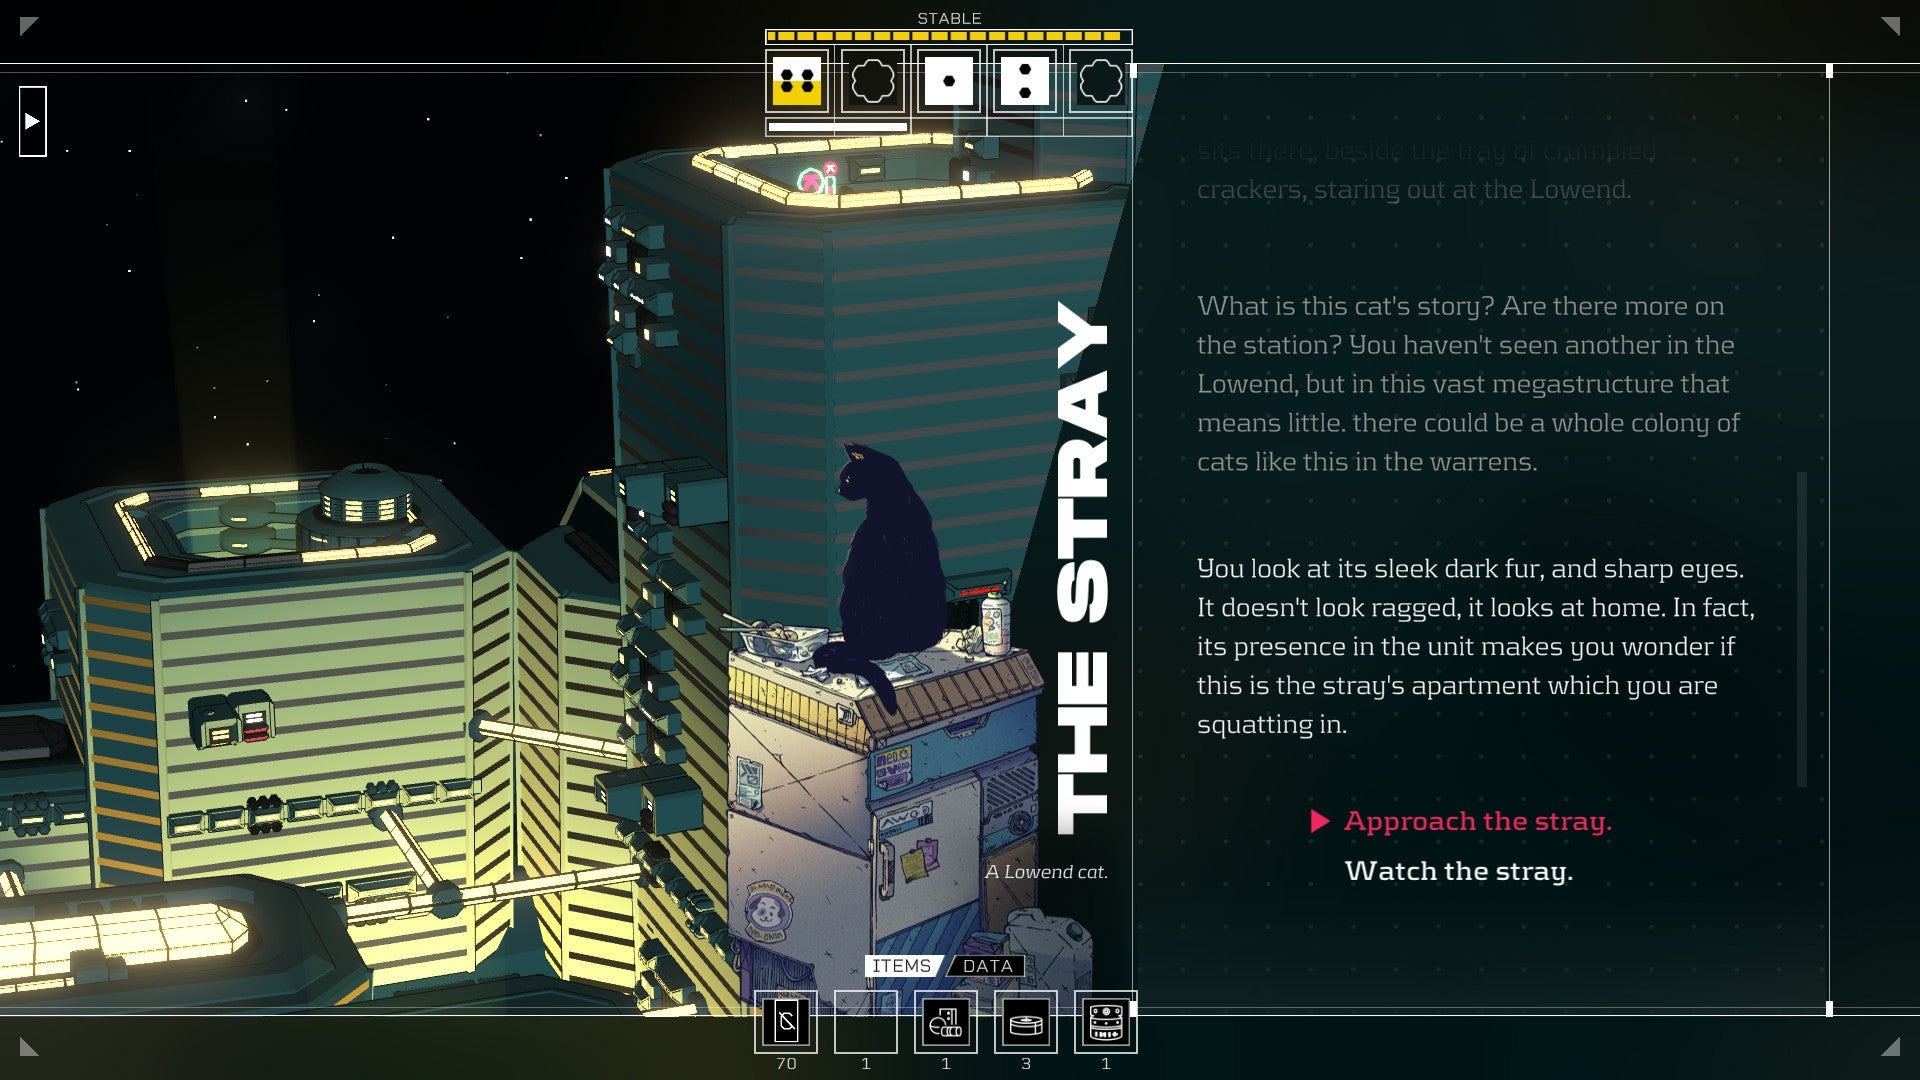 Citizen Sleeper review - dialogue screen with a cat, just known as The Stray, and a choice to approach it or stay away.